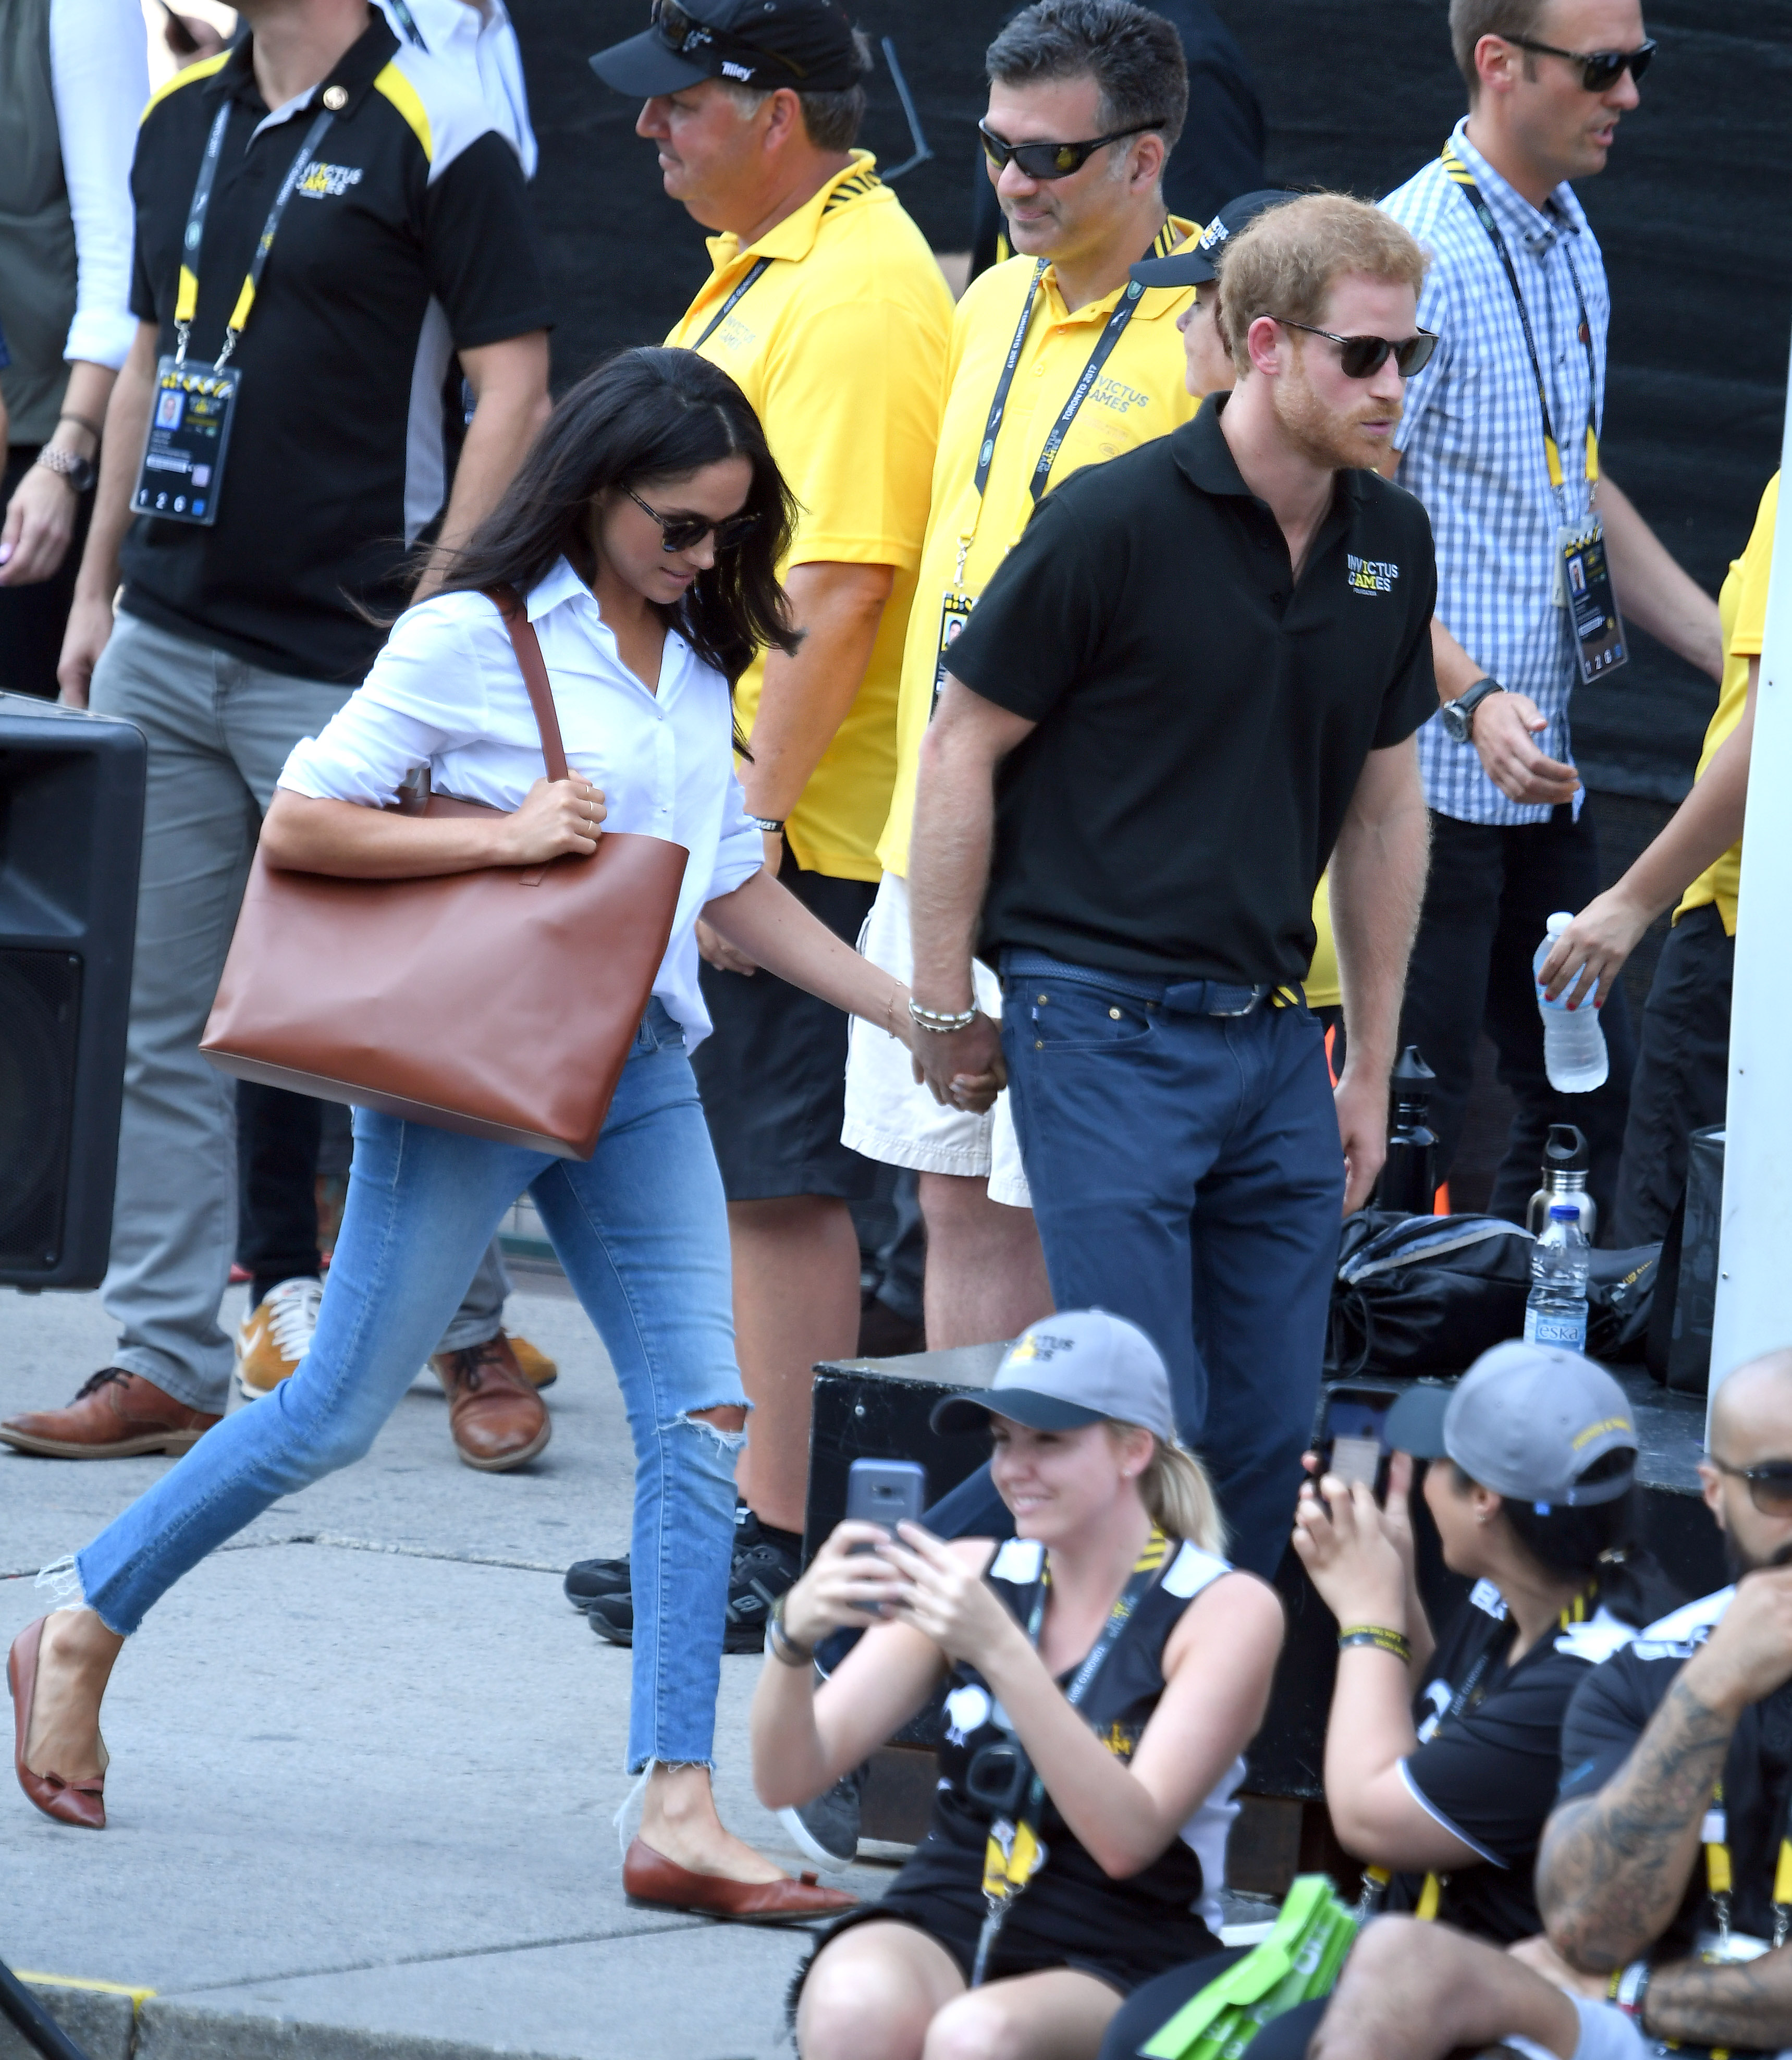 TORONTO, ON - SEPTEMBER 25: Meghan Markle and Prince Harry hold hands the Wheelchair Tennis on day 3 of the Invictus Games Toronto 2017 at Nathan Philips Square on September 25, 2017 in Toronto, Canada. The Games use the power of sport to inspire recovery, support rehabilitation and generate a wider understanding and respect for the Armed Forces. (Photo by Karwai Tang/WireImage)